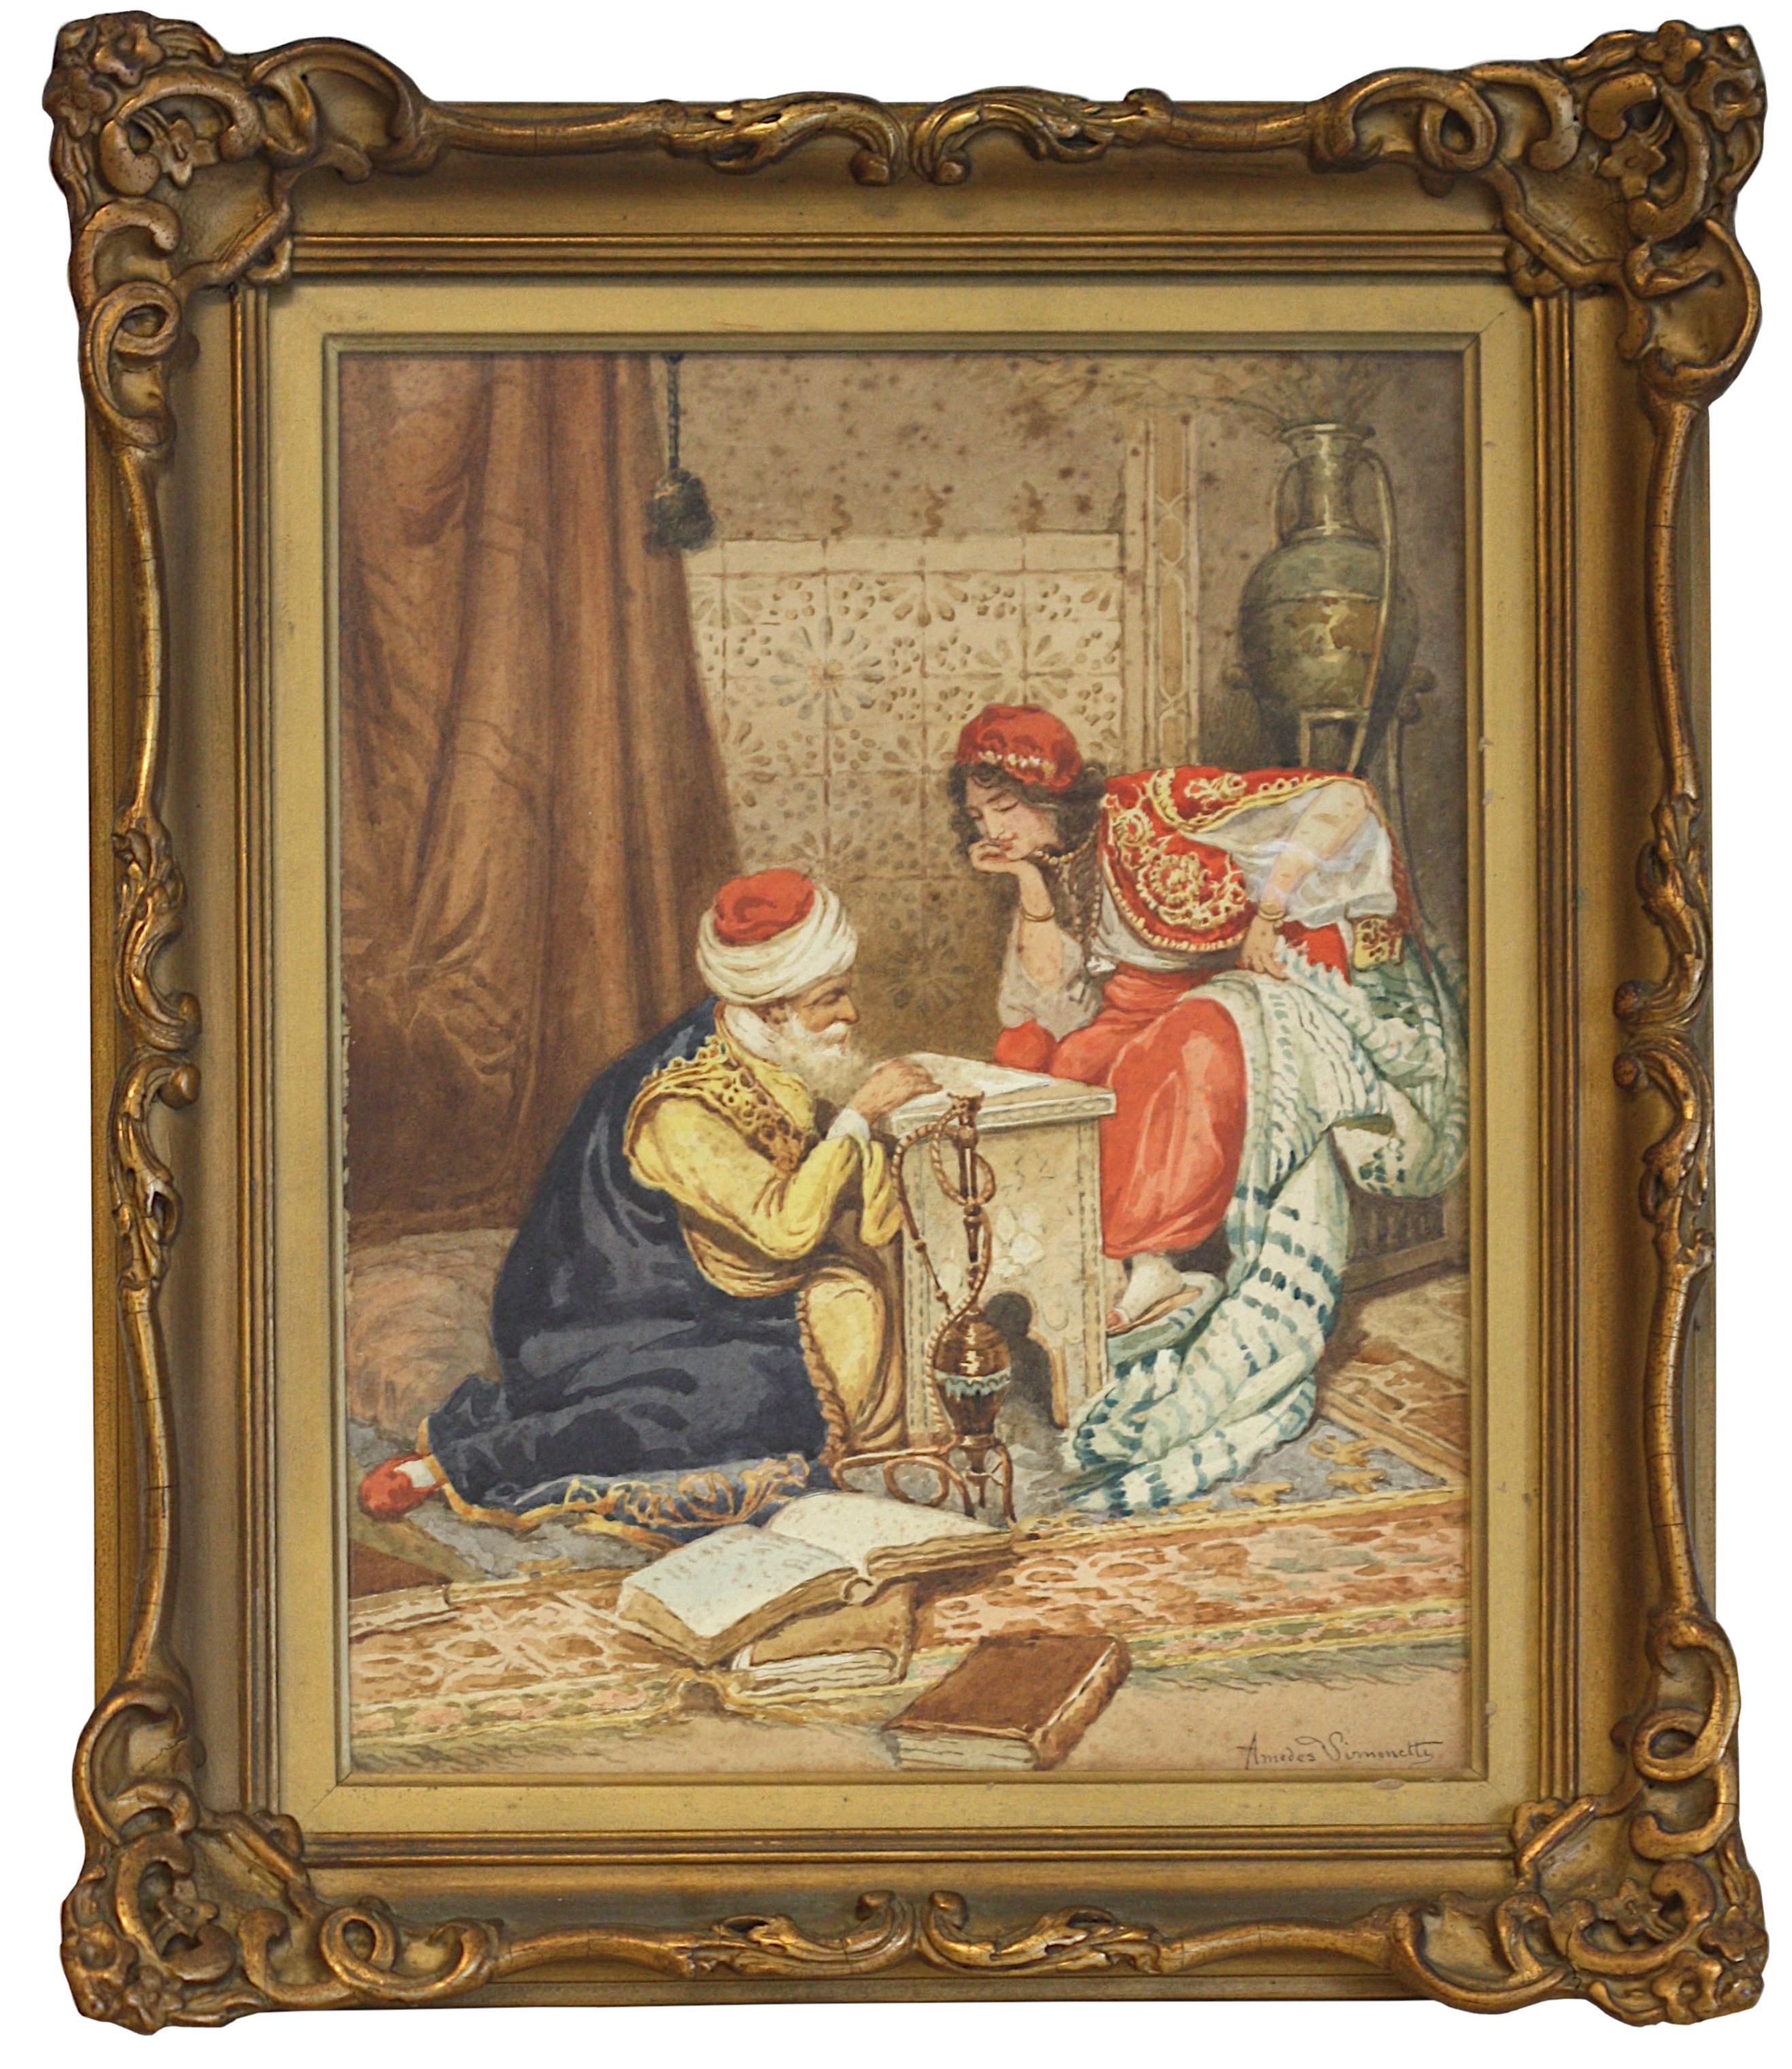 
Amedes Simonetti, (Italian, 1874-1922) 
Teacher and a Young Woman, gouache on paper, signed in script, l.r., 
14 by 10.75 in. (35.56 x 27.30 cm.), overall, in a gilt frame 19 by 15.5 in. (48.26 x 39.37)

Provenance: Descended in the same family,